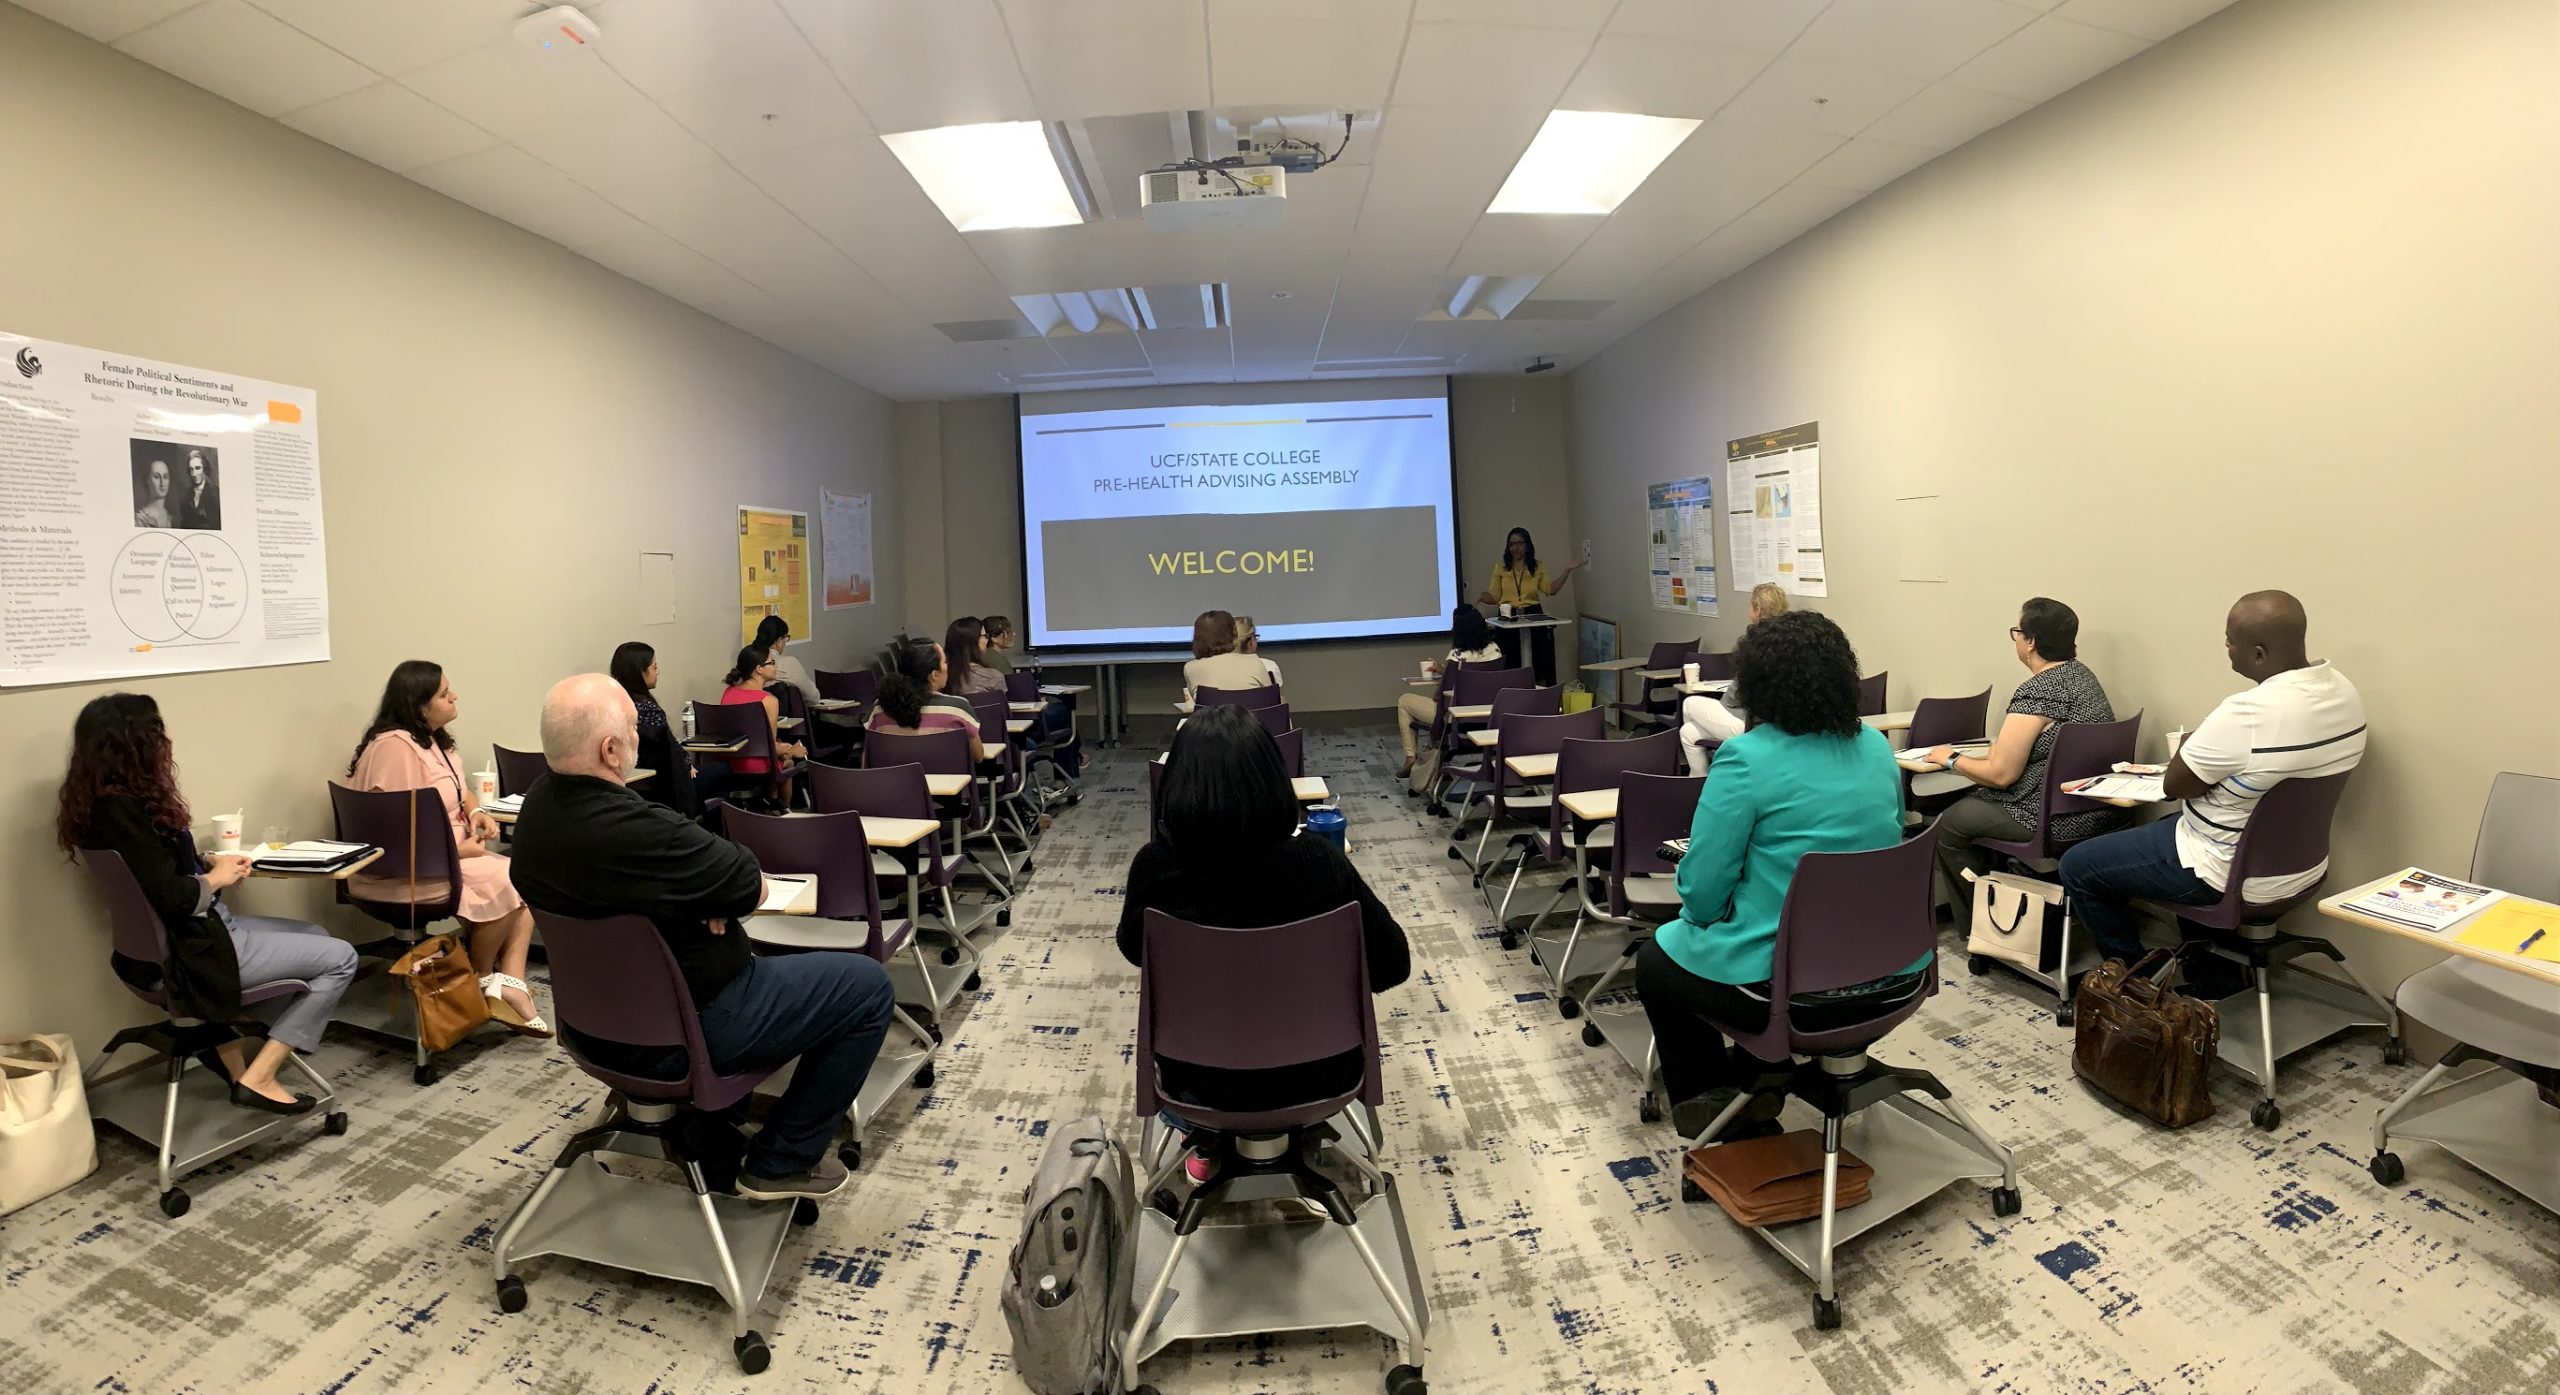 October 2019 UCF/State College Pre-Health Advising Assembly